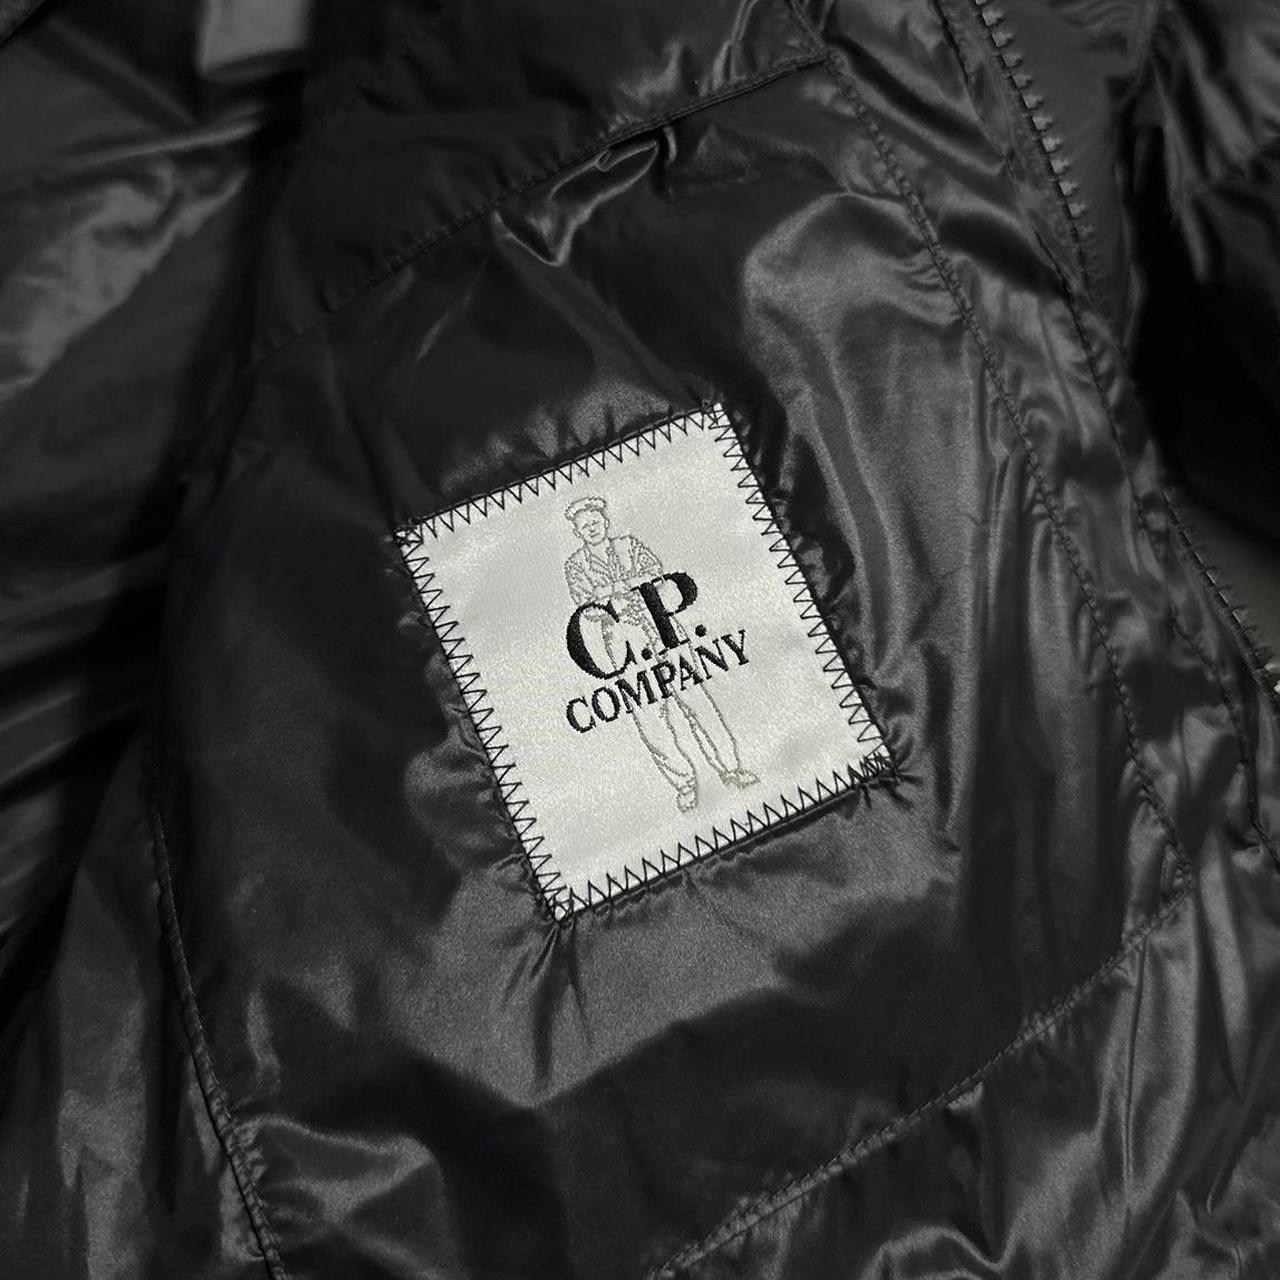 CP Company Black D.D. Shell Down Jacket - Known Source